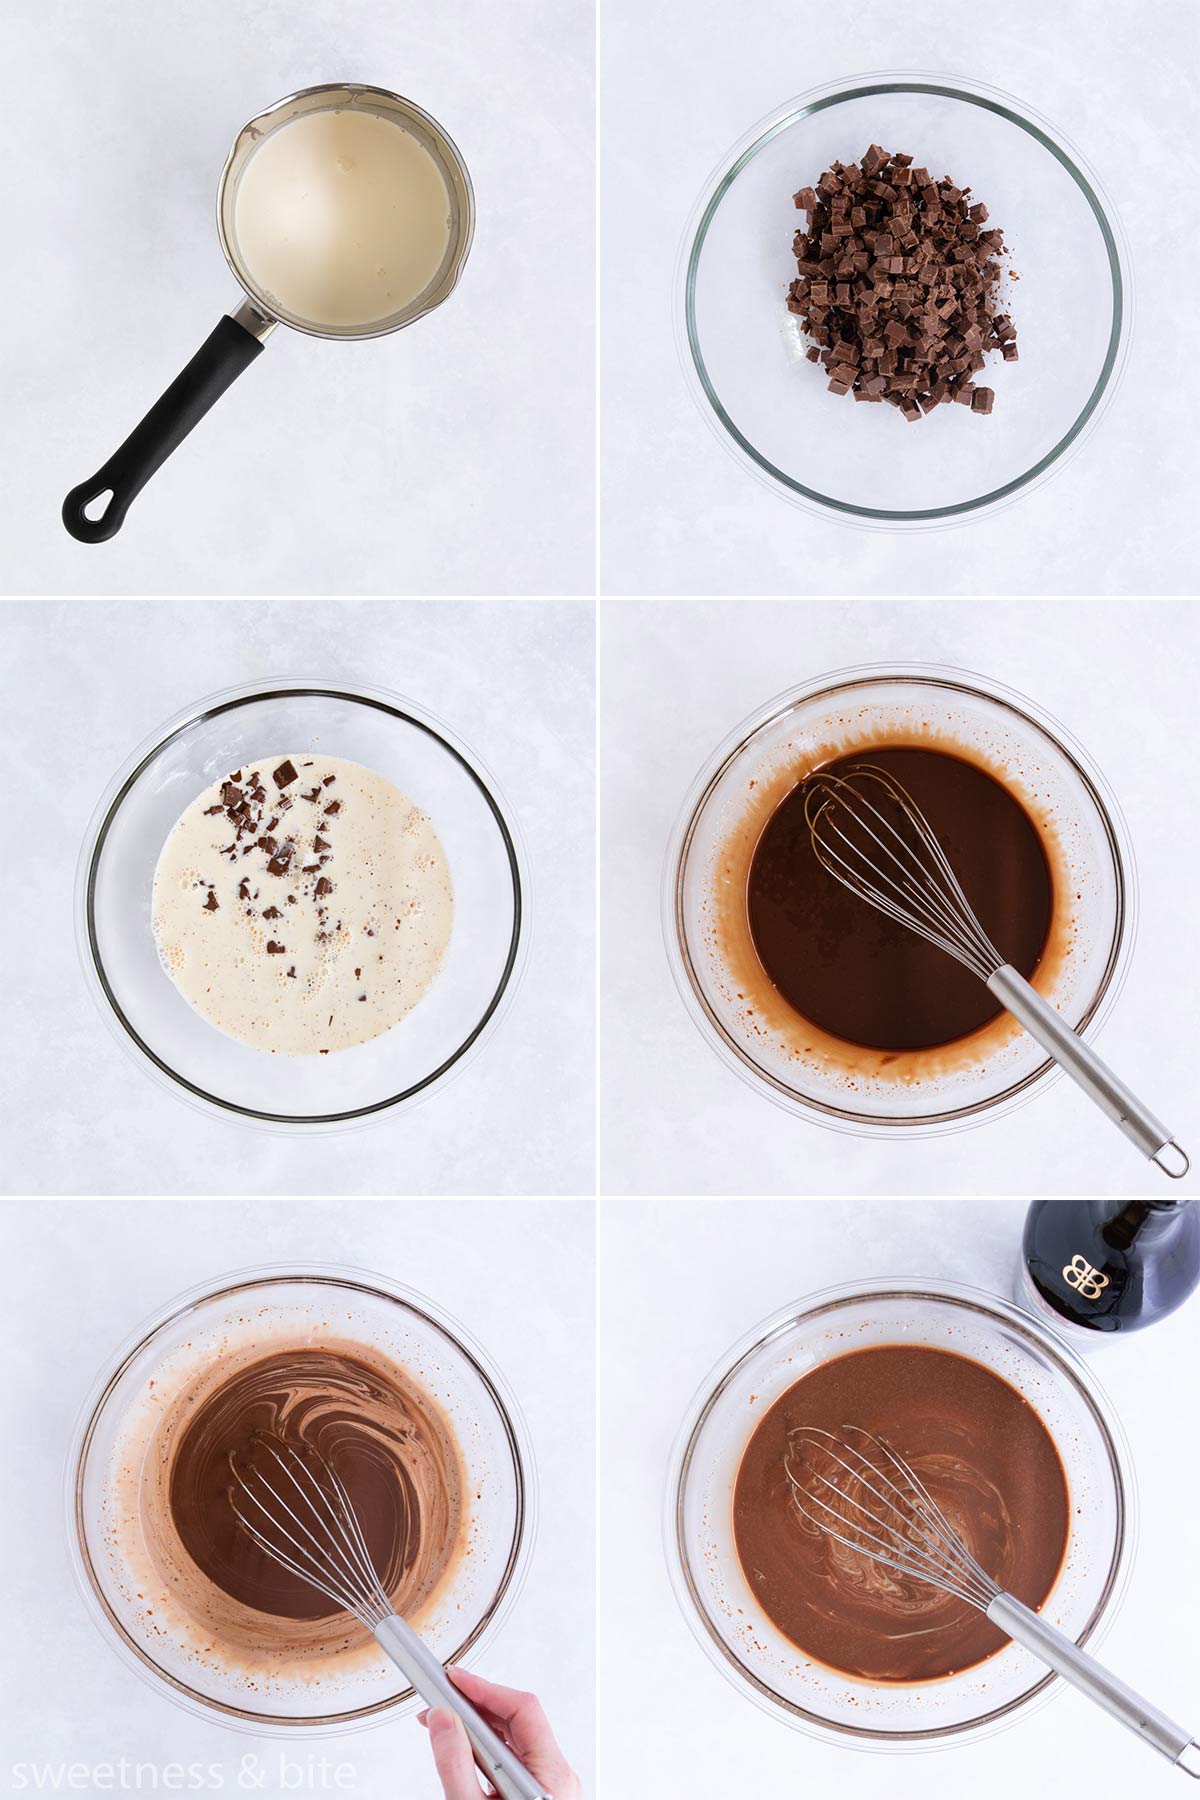 Collage of 6 images showing the chocolate being melted by the hot cream, and the Irish Cream being whisked in.